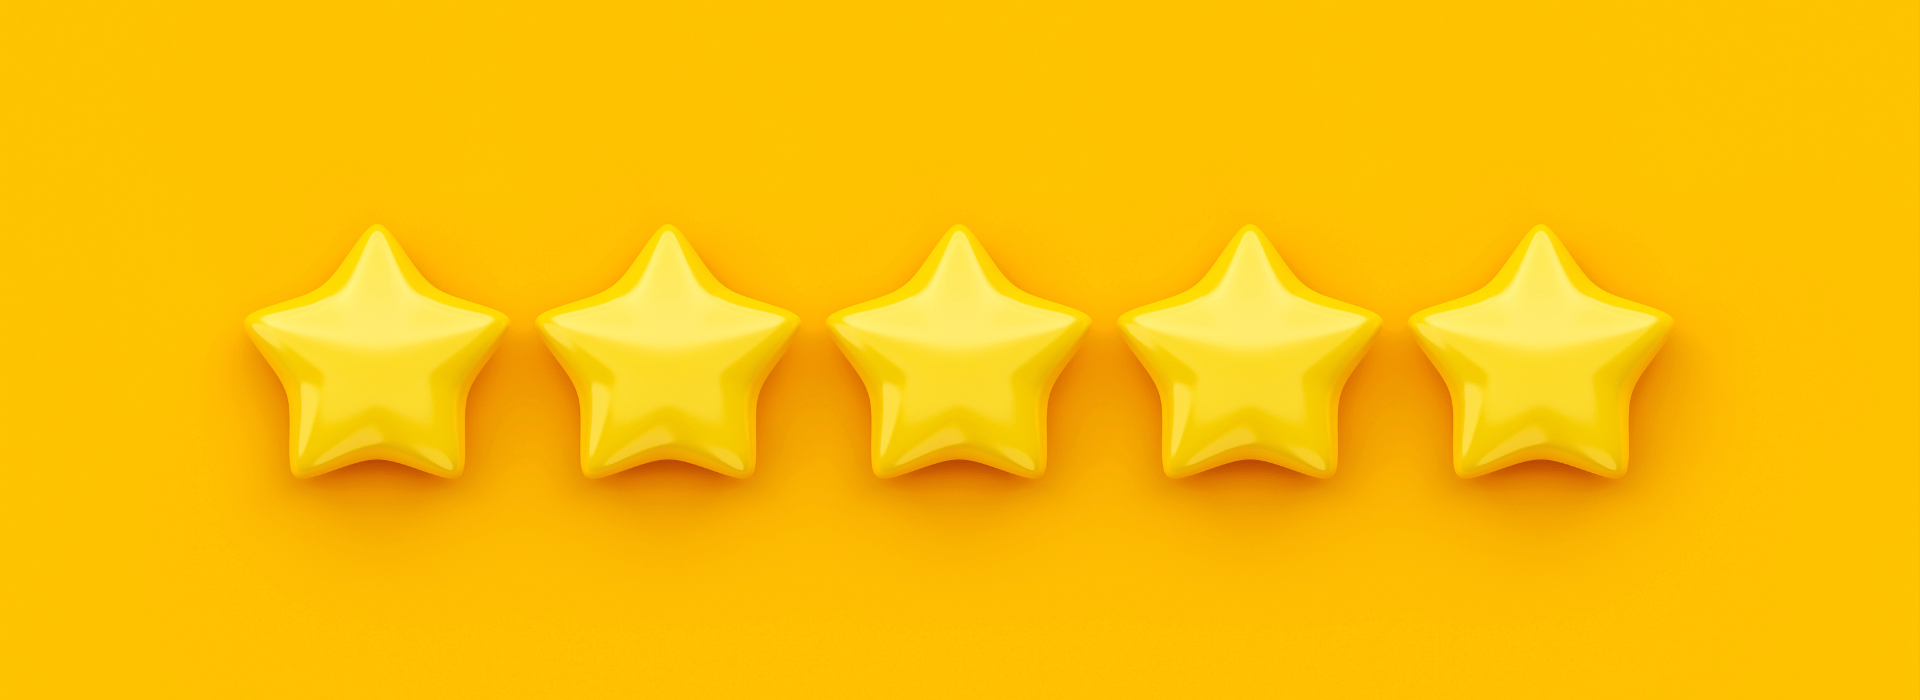 Five gold stars on a yellow background | Natural skincare – what’s the big deal? | Shine Body & Bath Chakra Soap | Blog